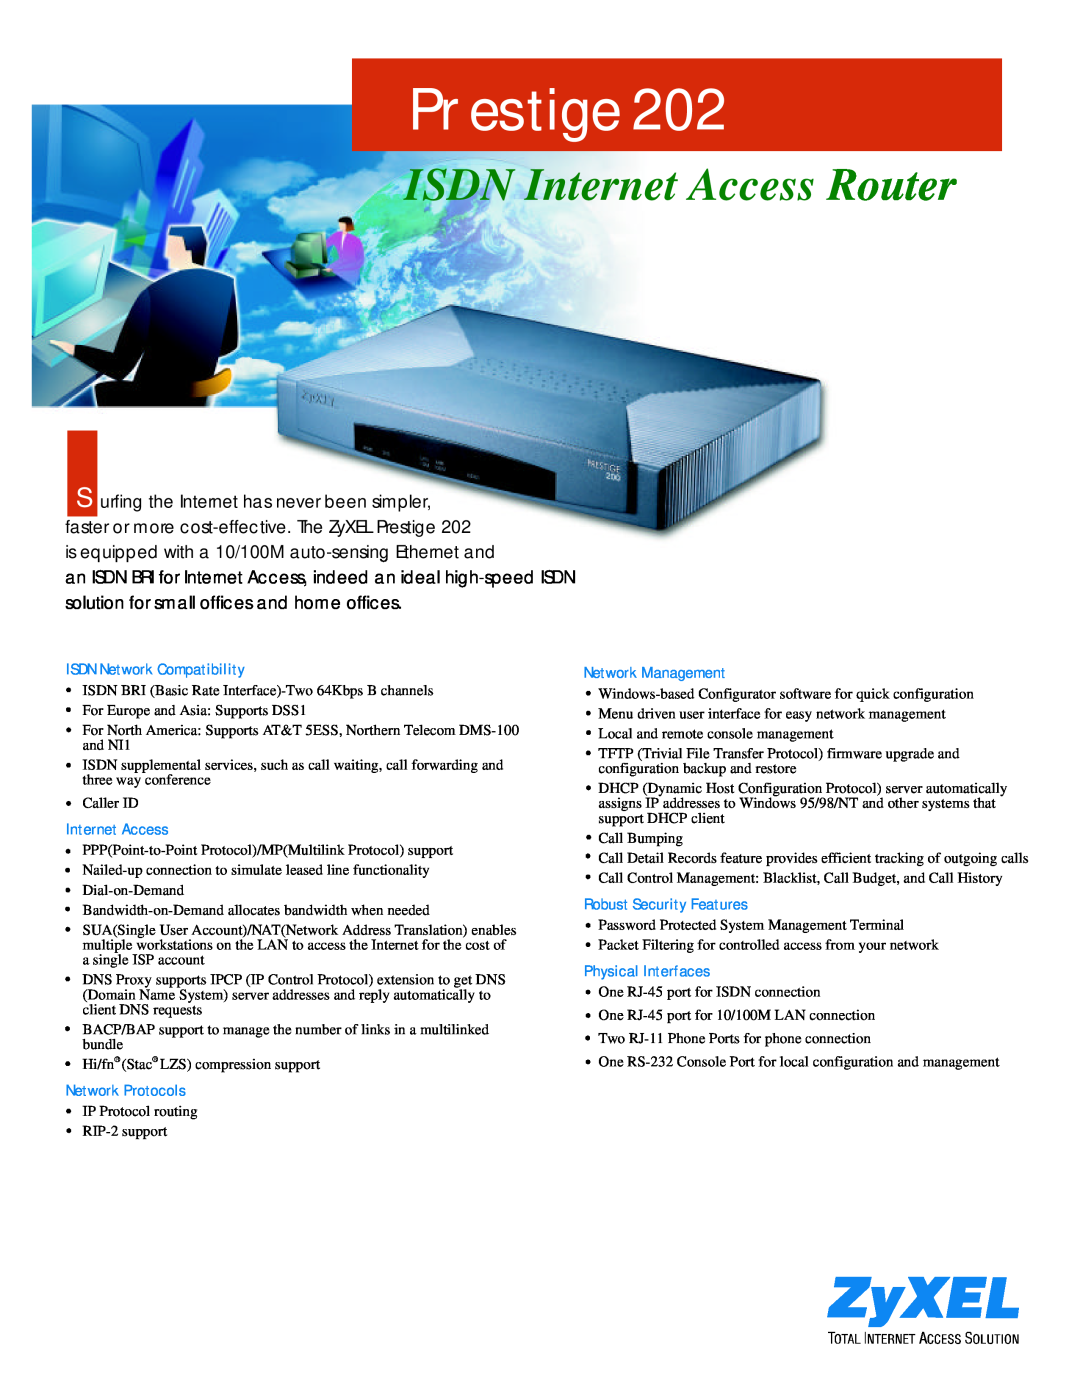 ZyXEL Communications 202 specifications Prestige, ISDN Internet Access Router 